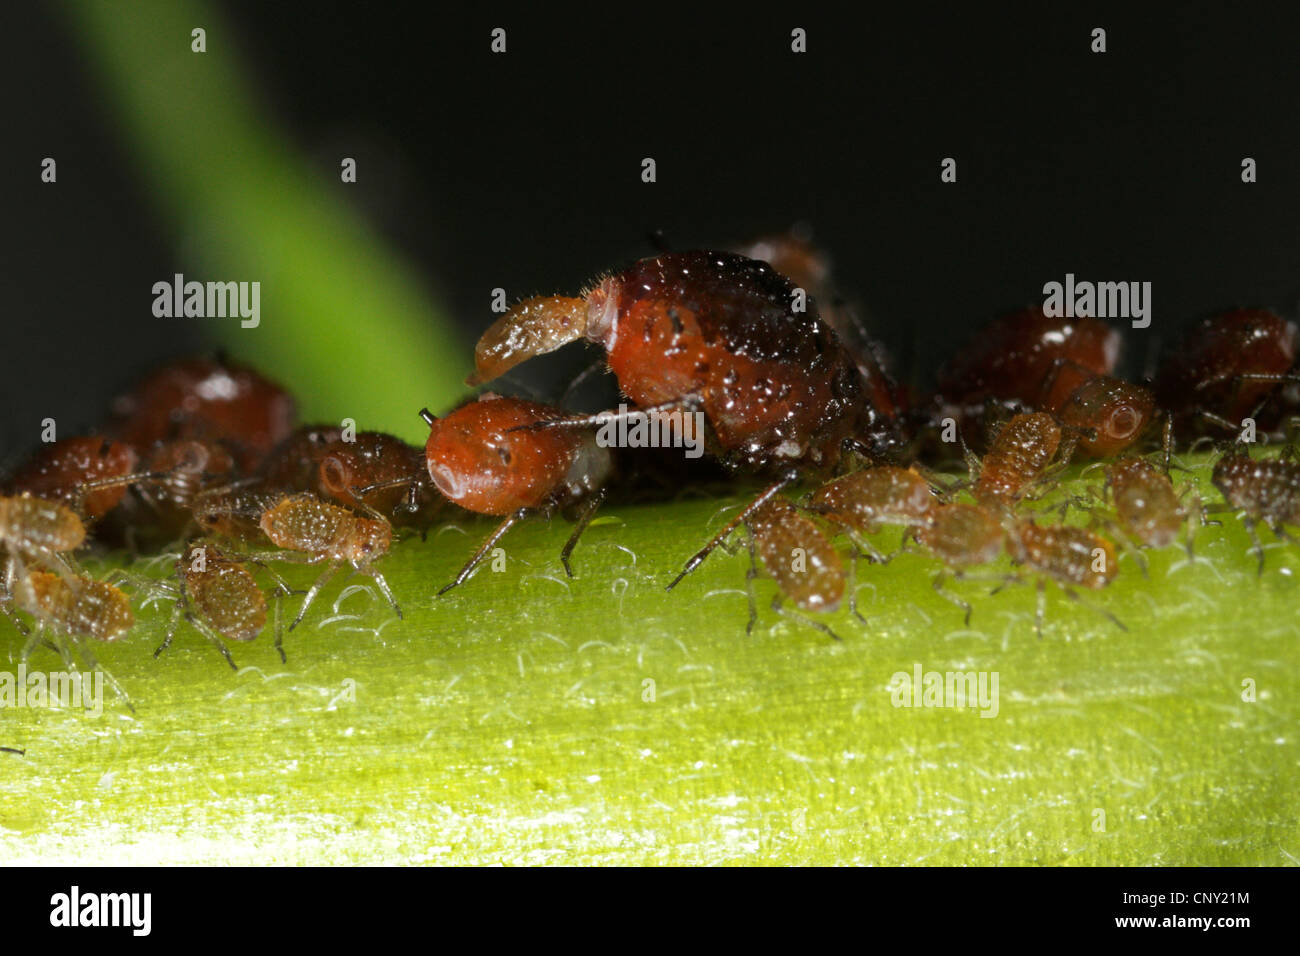 Aphid (Brachycaudus sp.), aphid on a sprout giving birth to a juvenile, Germany, Bavaria, Eckental Stock Photo